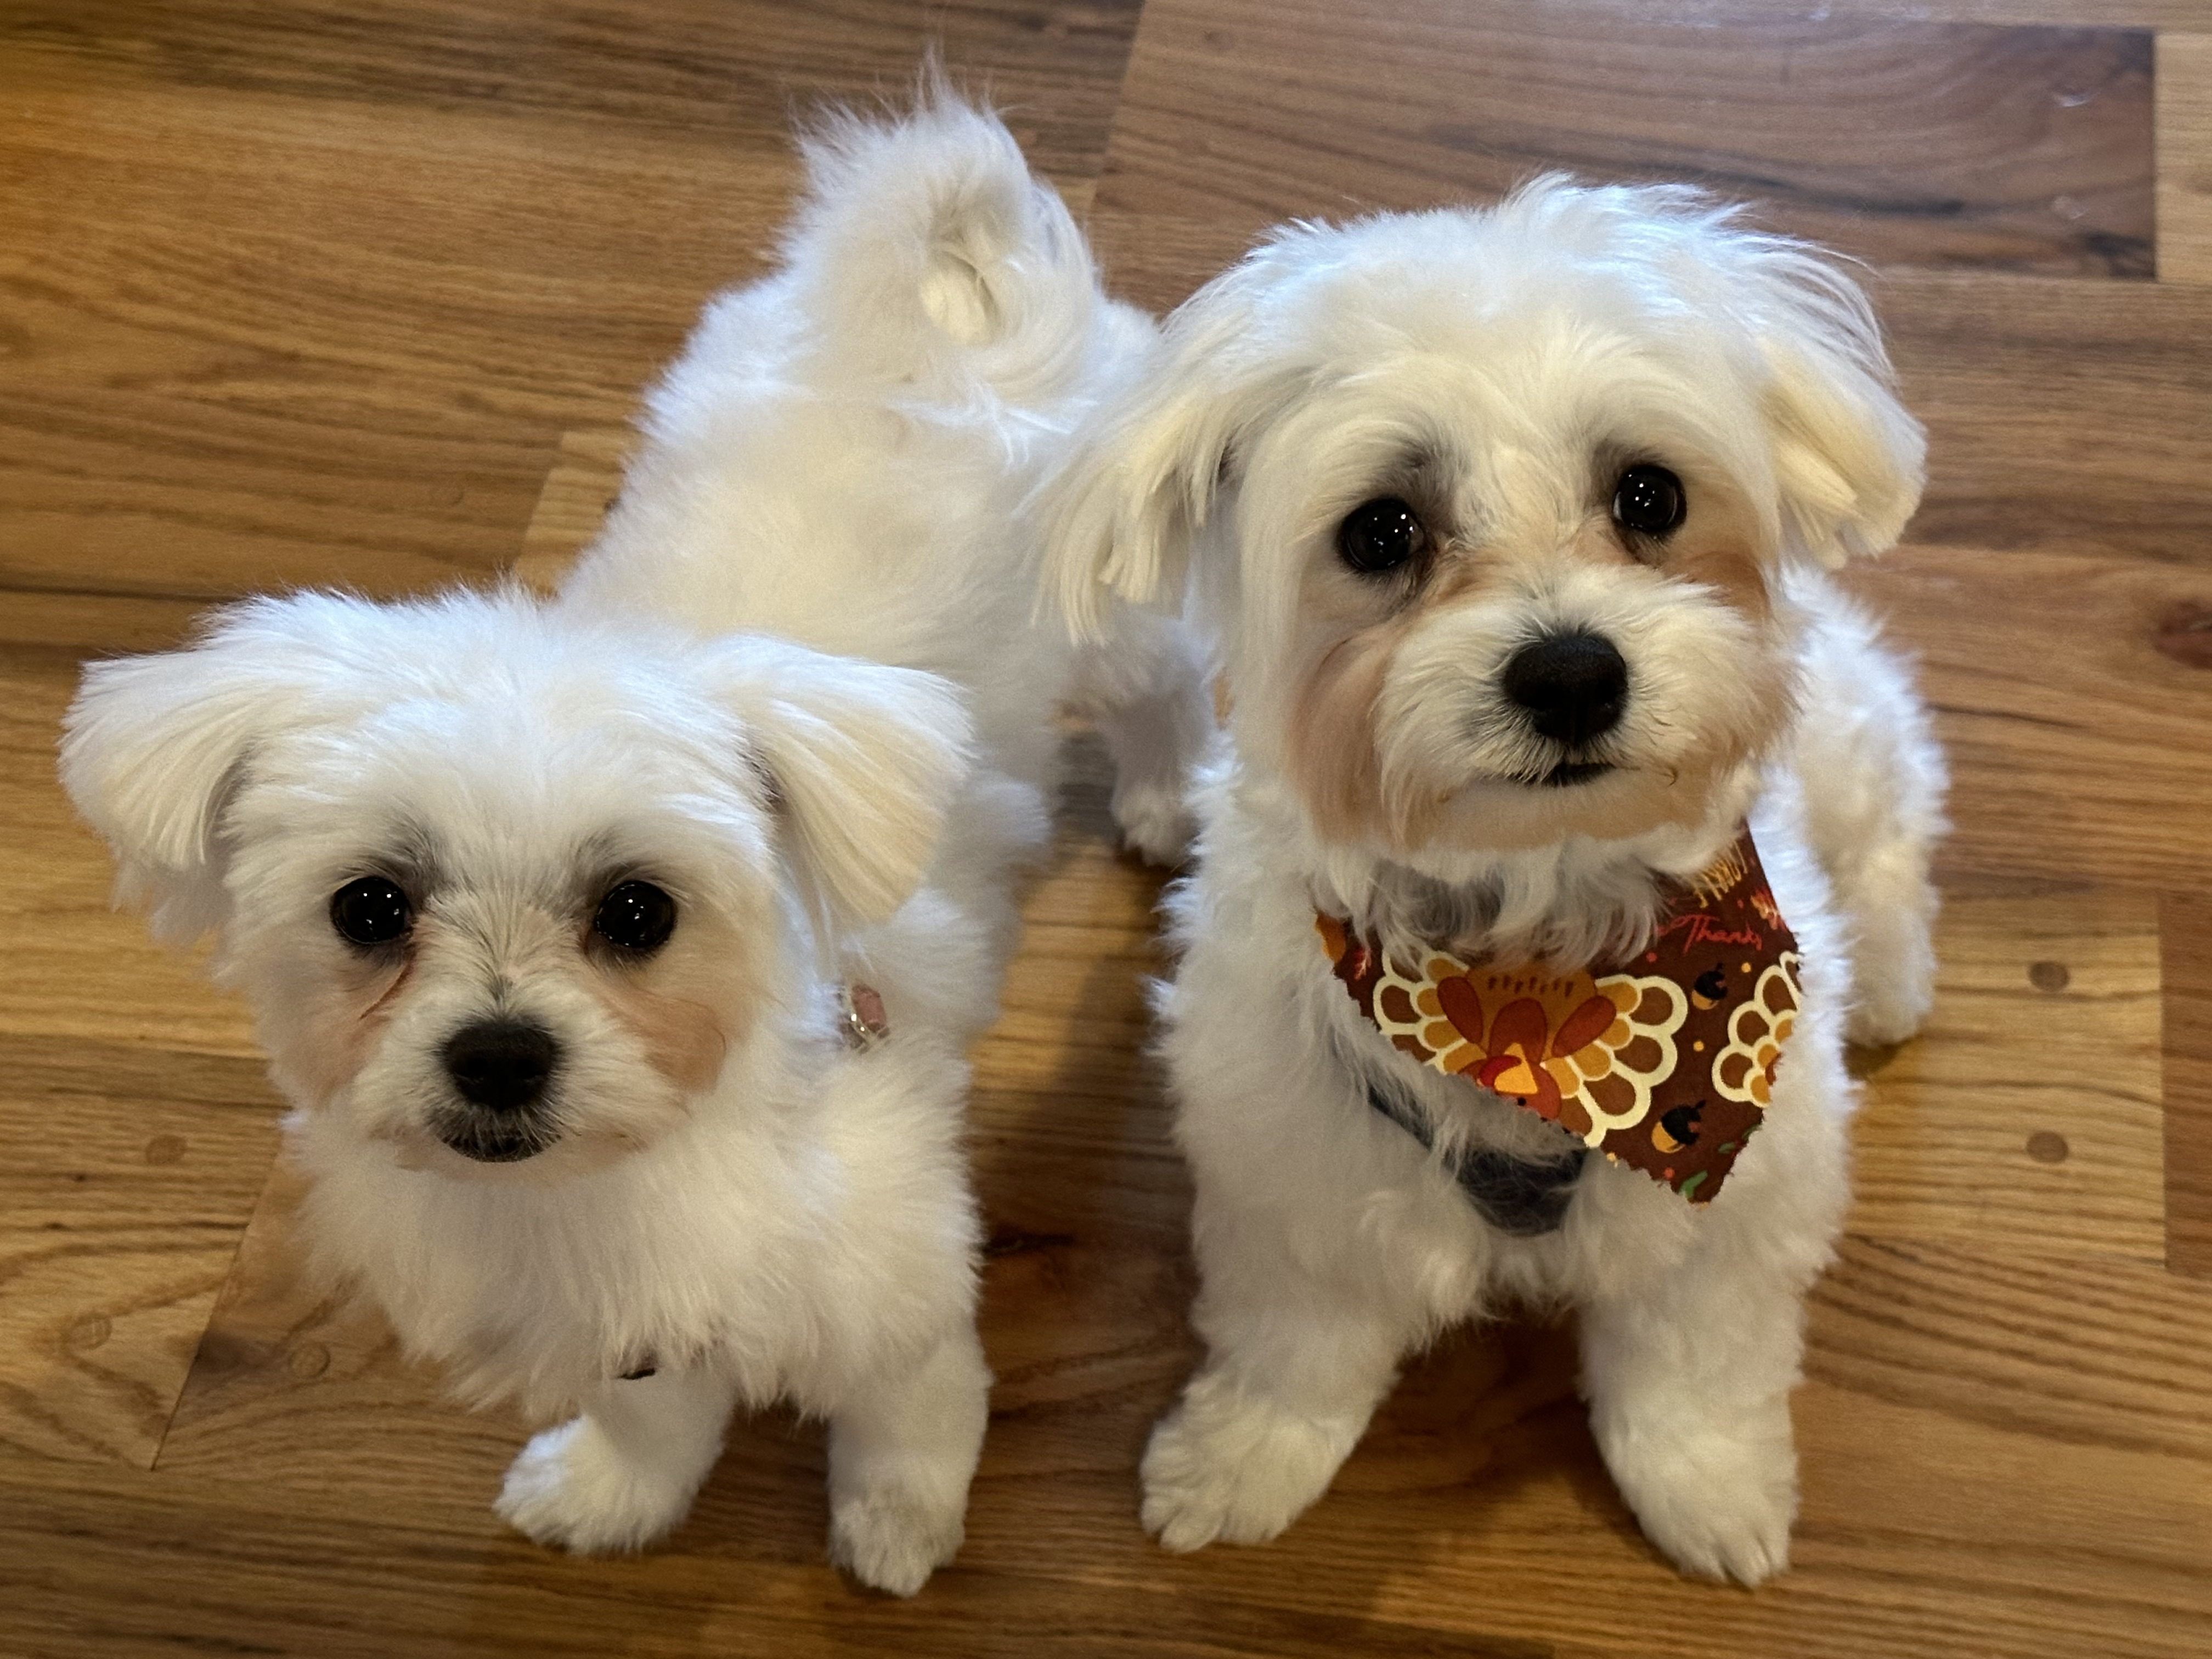 Lucy & Frank are Ready for Thanksgiving